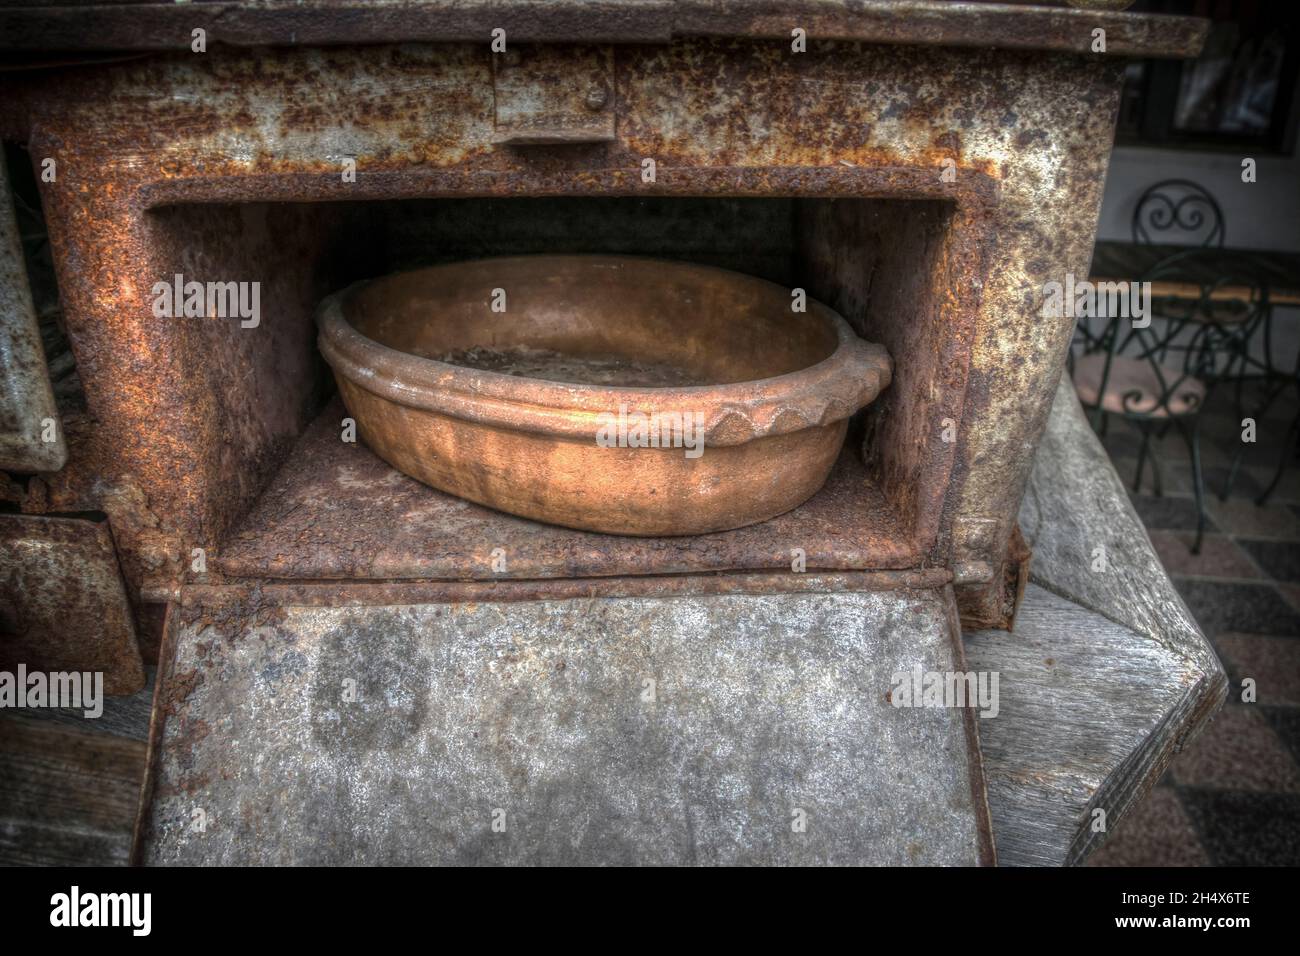 A vintage baking dish and an old stove Stock Photo